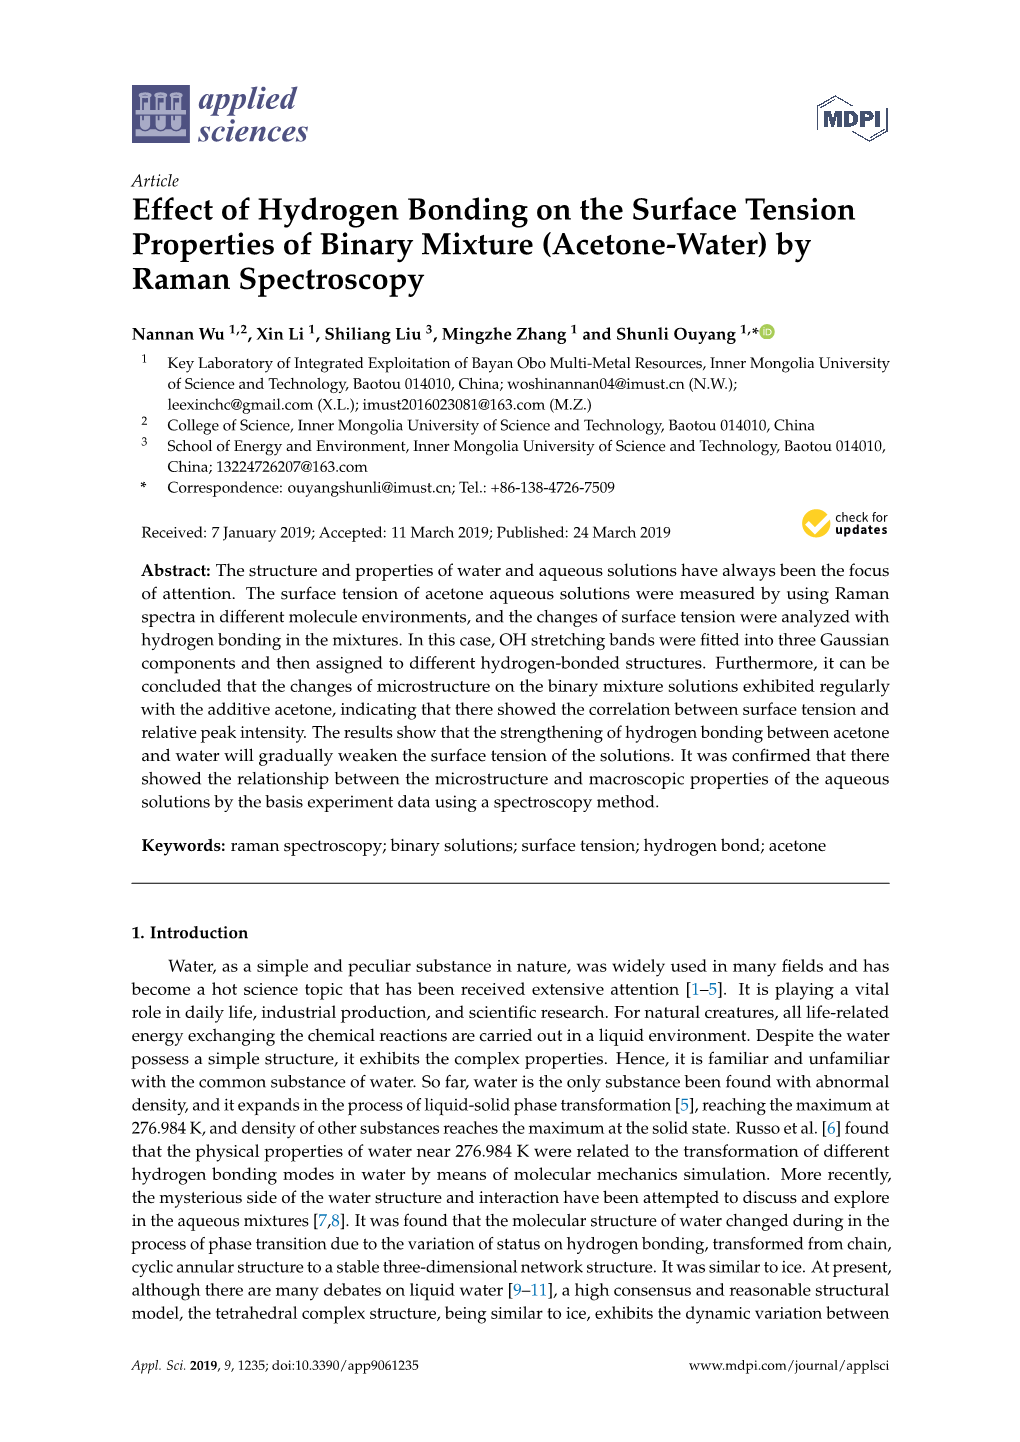 Effect of Hydrogen Bonding on the Surface Tension Properties of Binary Mixture (Acetone-Water) by Raman Spectroscopy